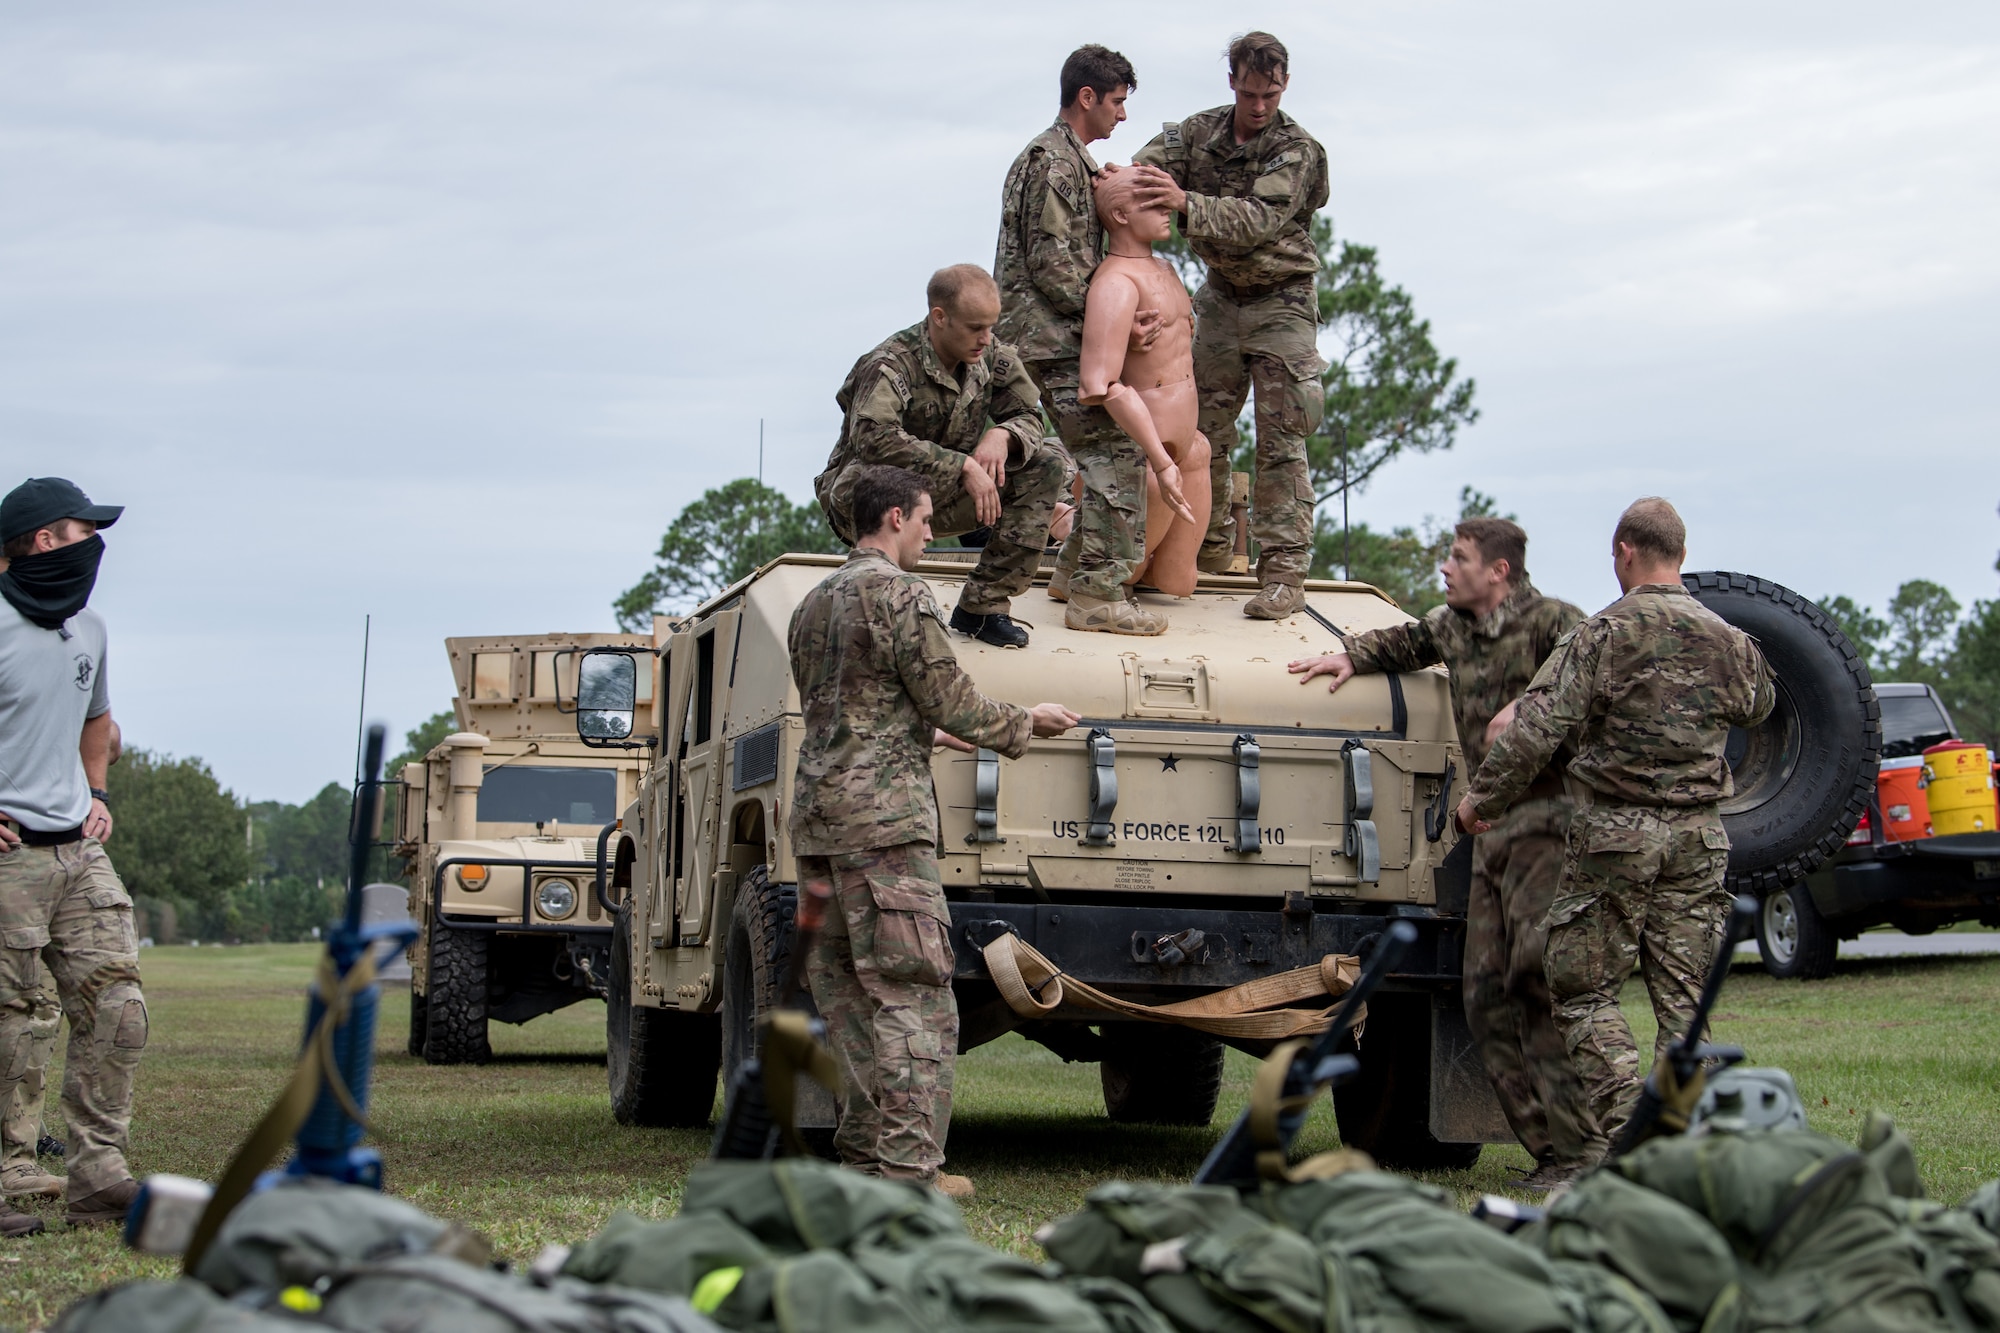 Special Tactics tactical air control party candidates rescue a simulated patient from a Humvee. Several candidates are standing on the roof of the Humvee with the mannequin between them. Others stand around the Humvee.